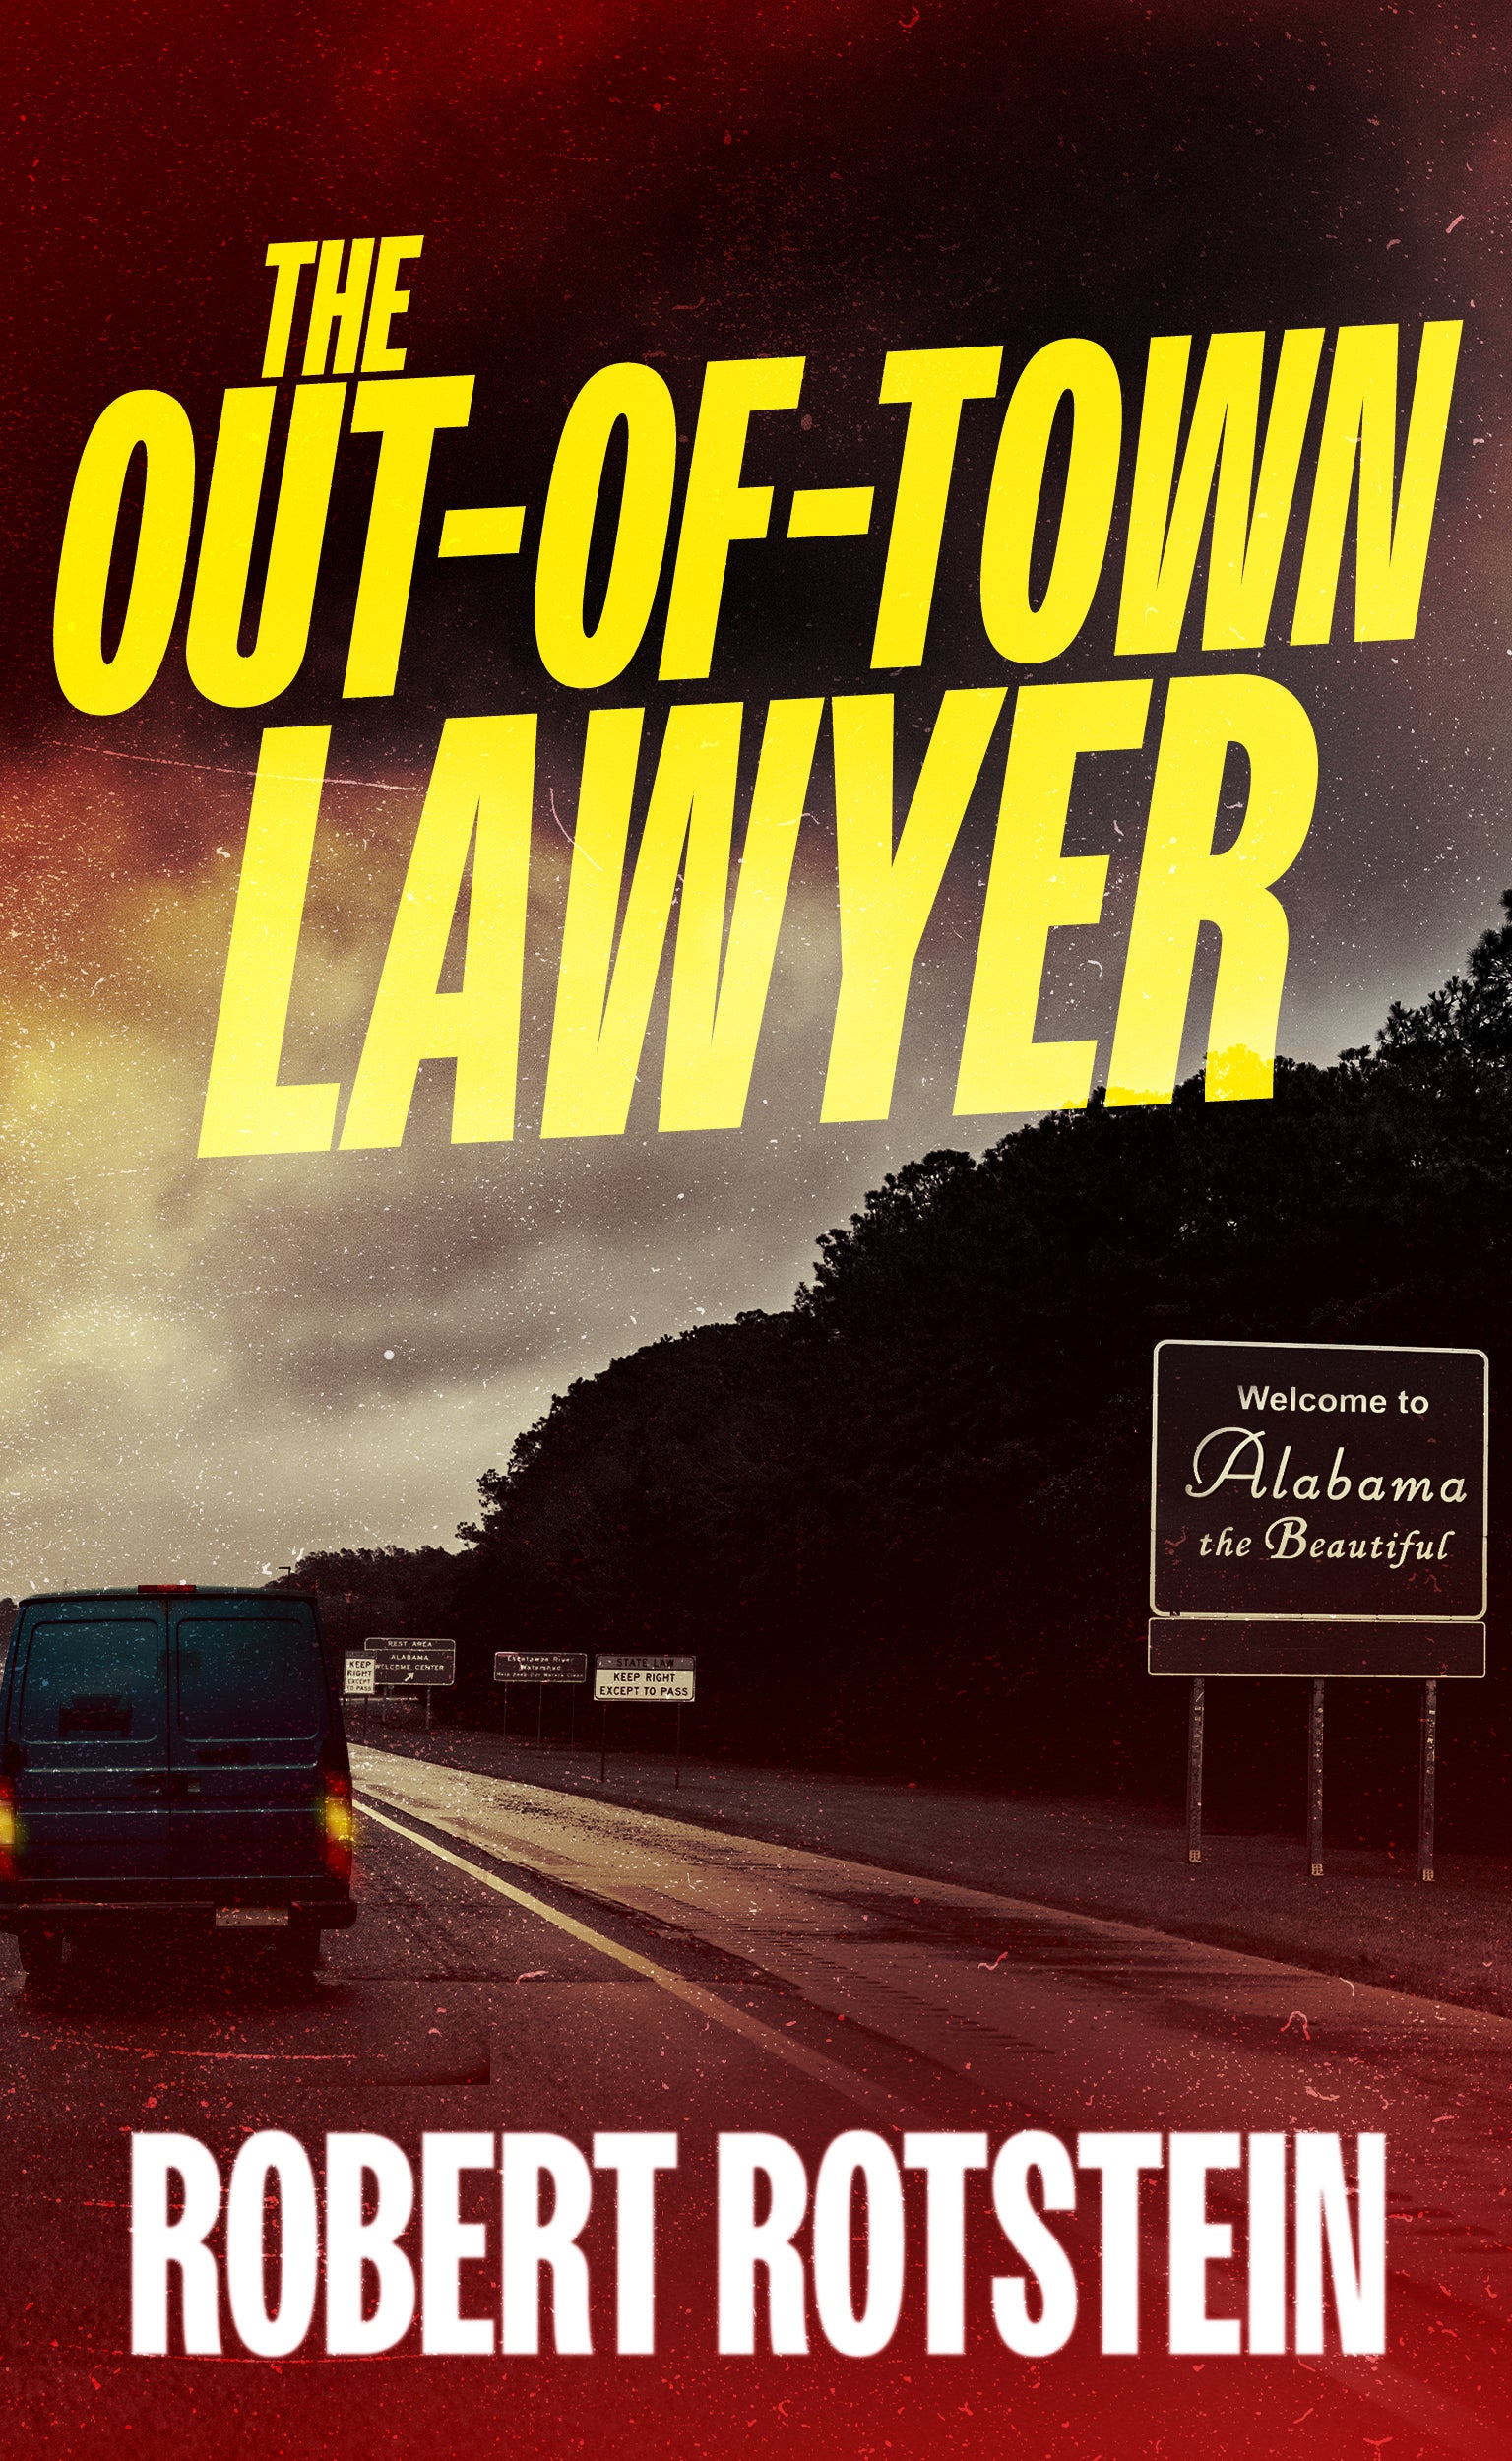 The Out-of-Town Lawyer